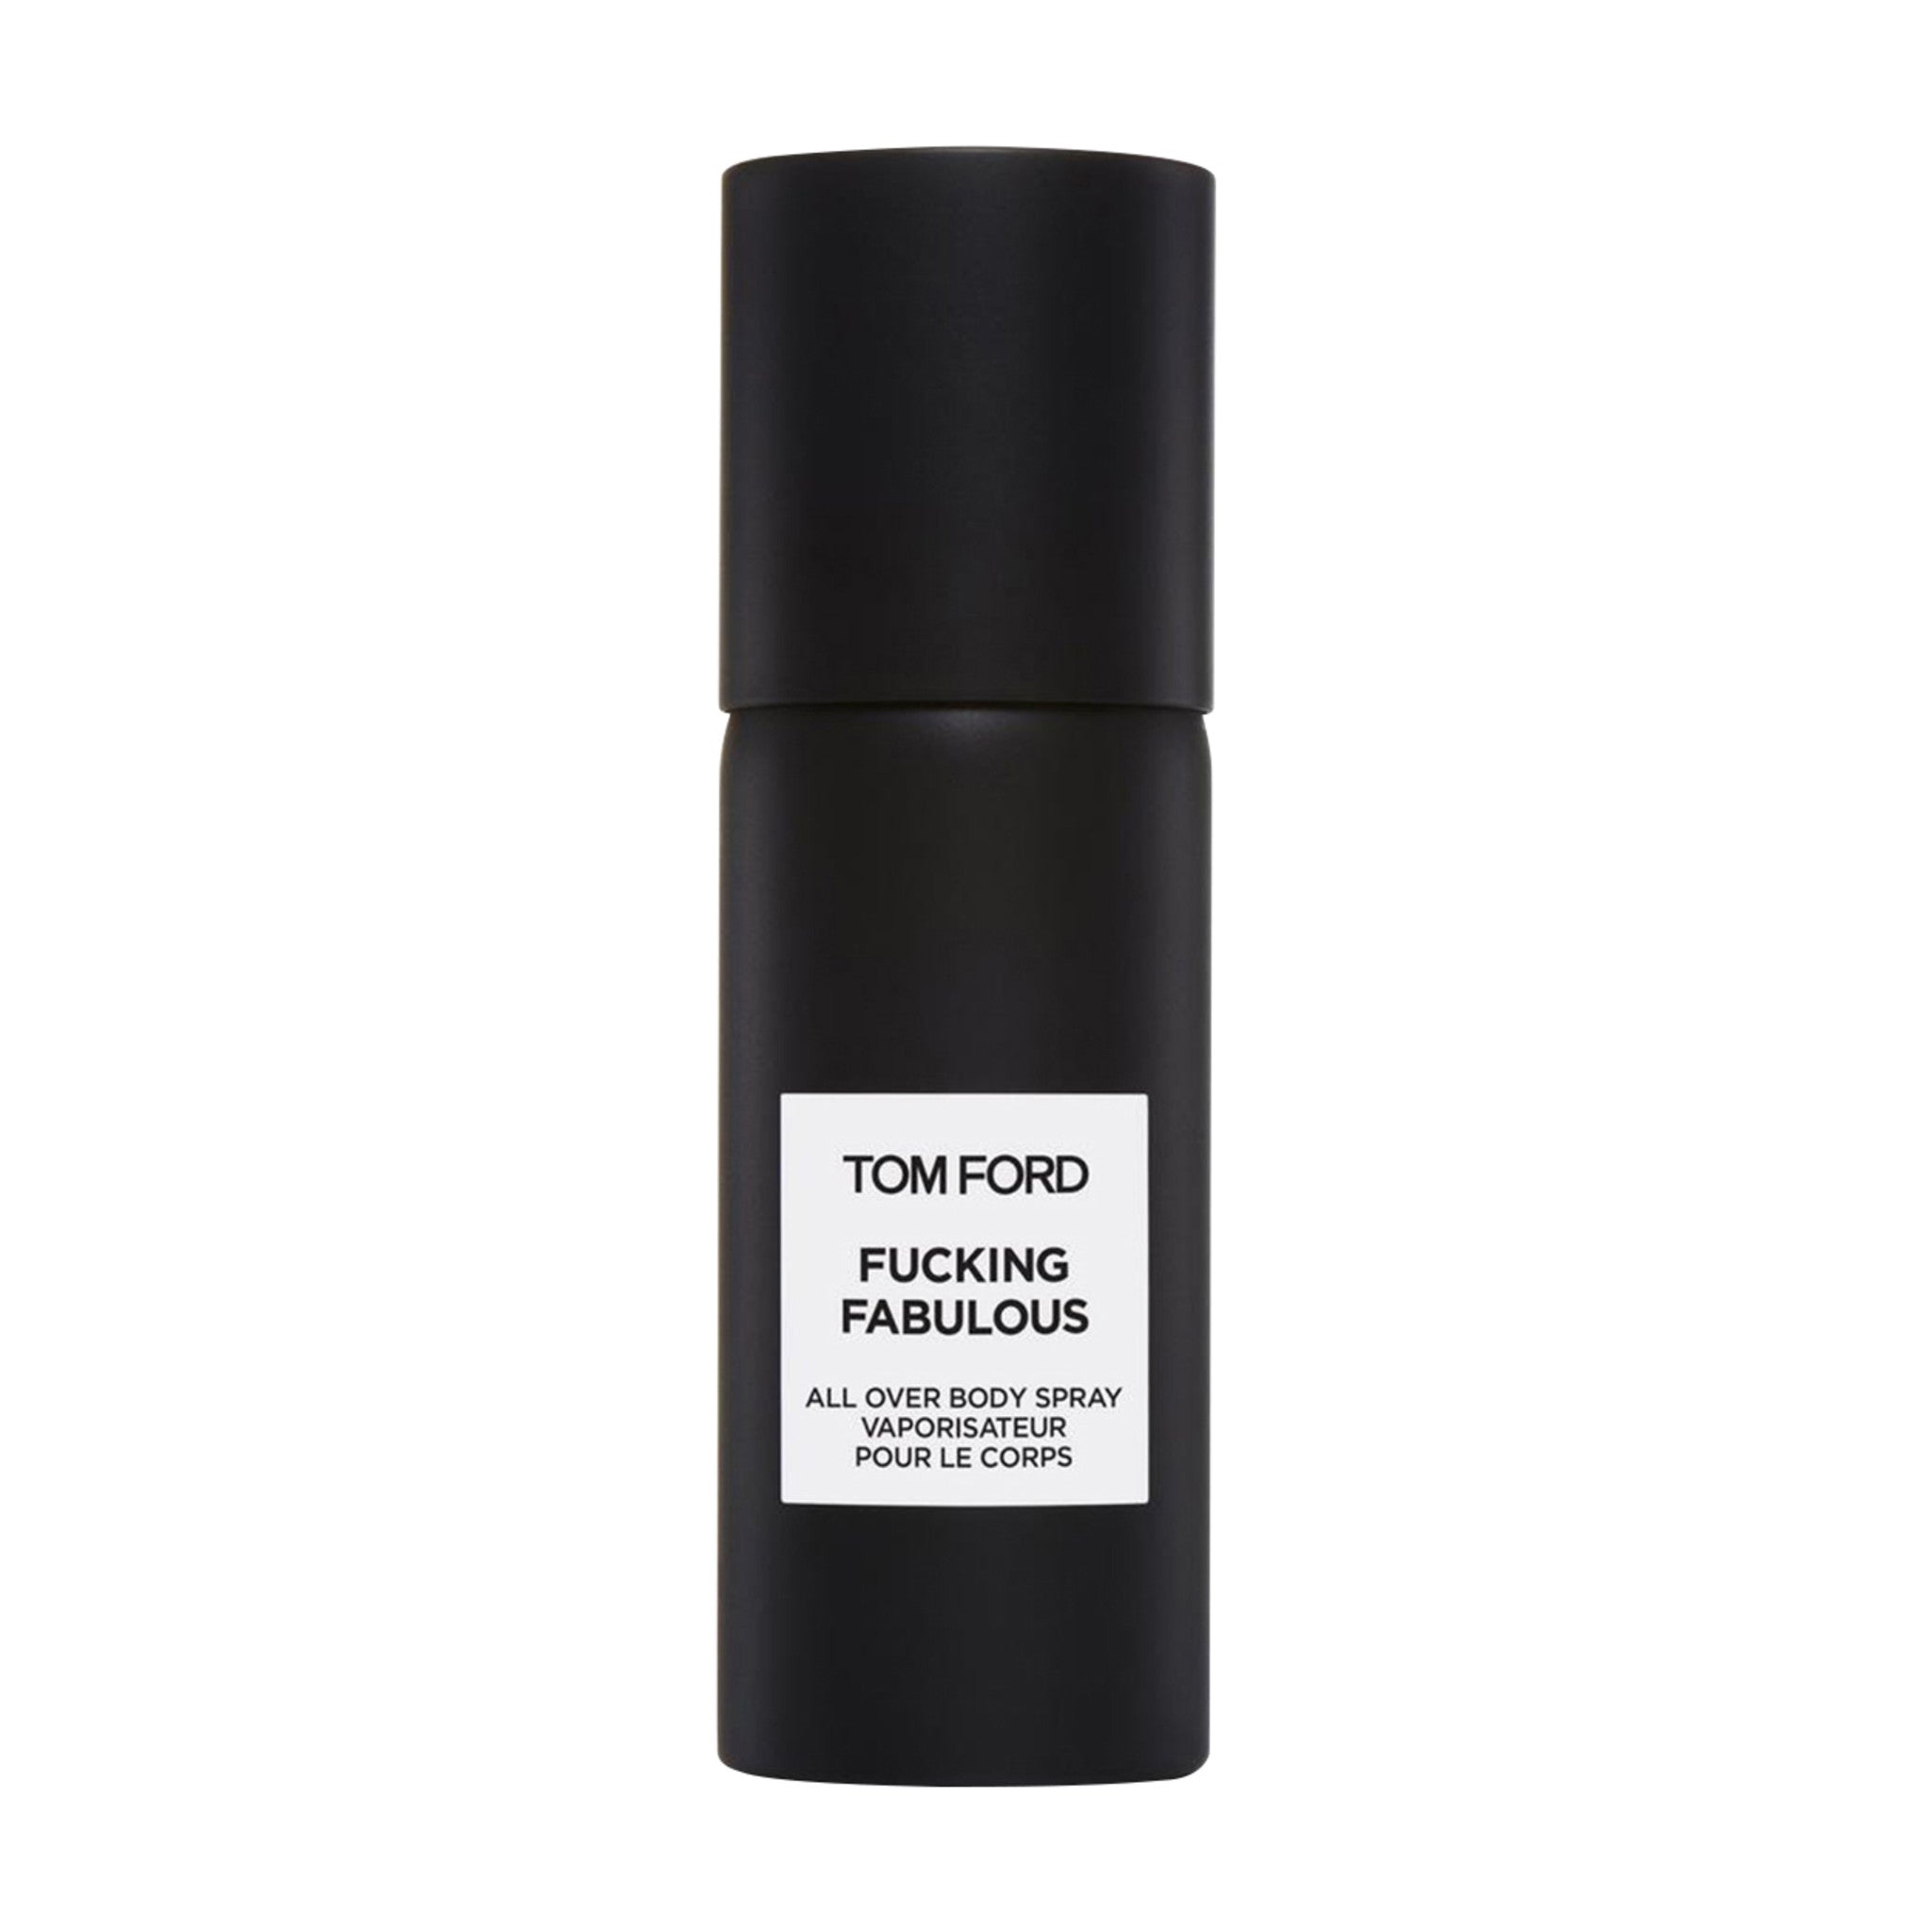 Tom Ford Fabulous All Over Body Spray main image.